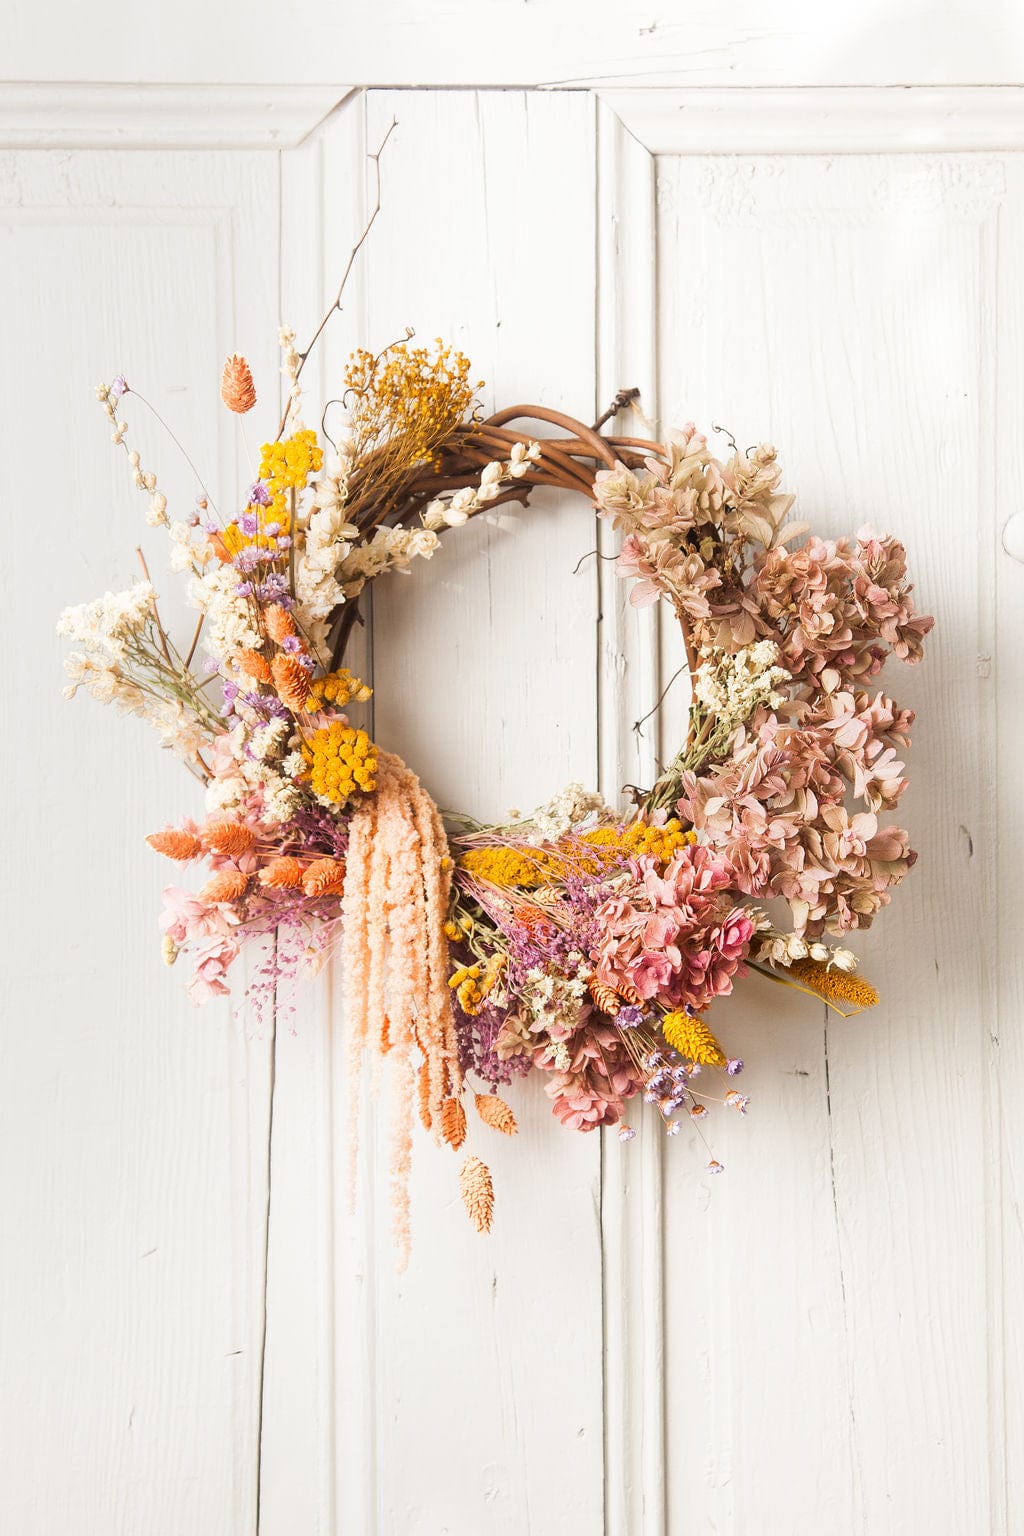 Idlewild Floral Co. Custom Wreath : Add to cart with your choice of bunches, flowers NOT included.